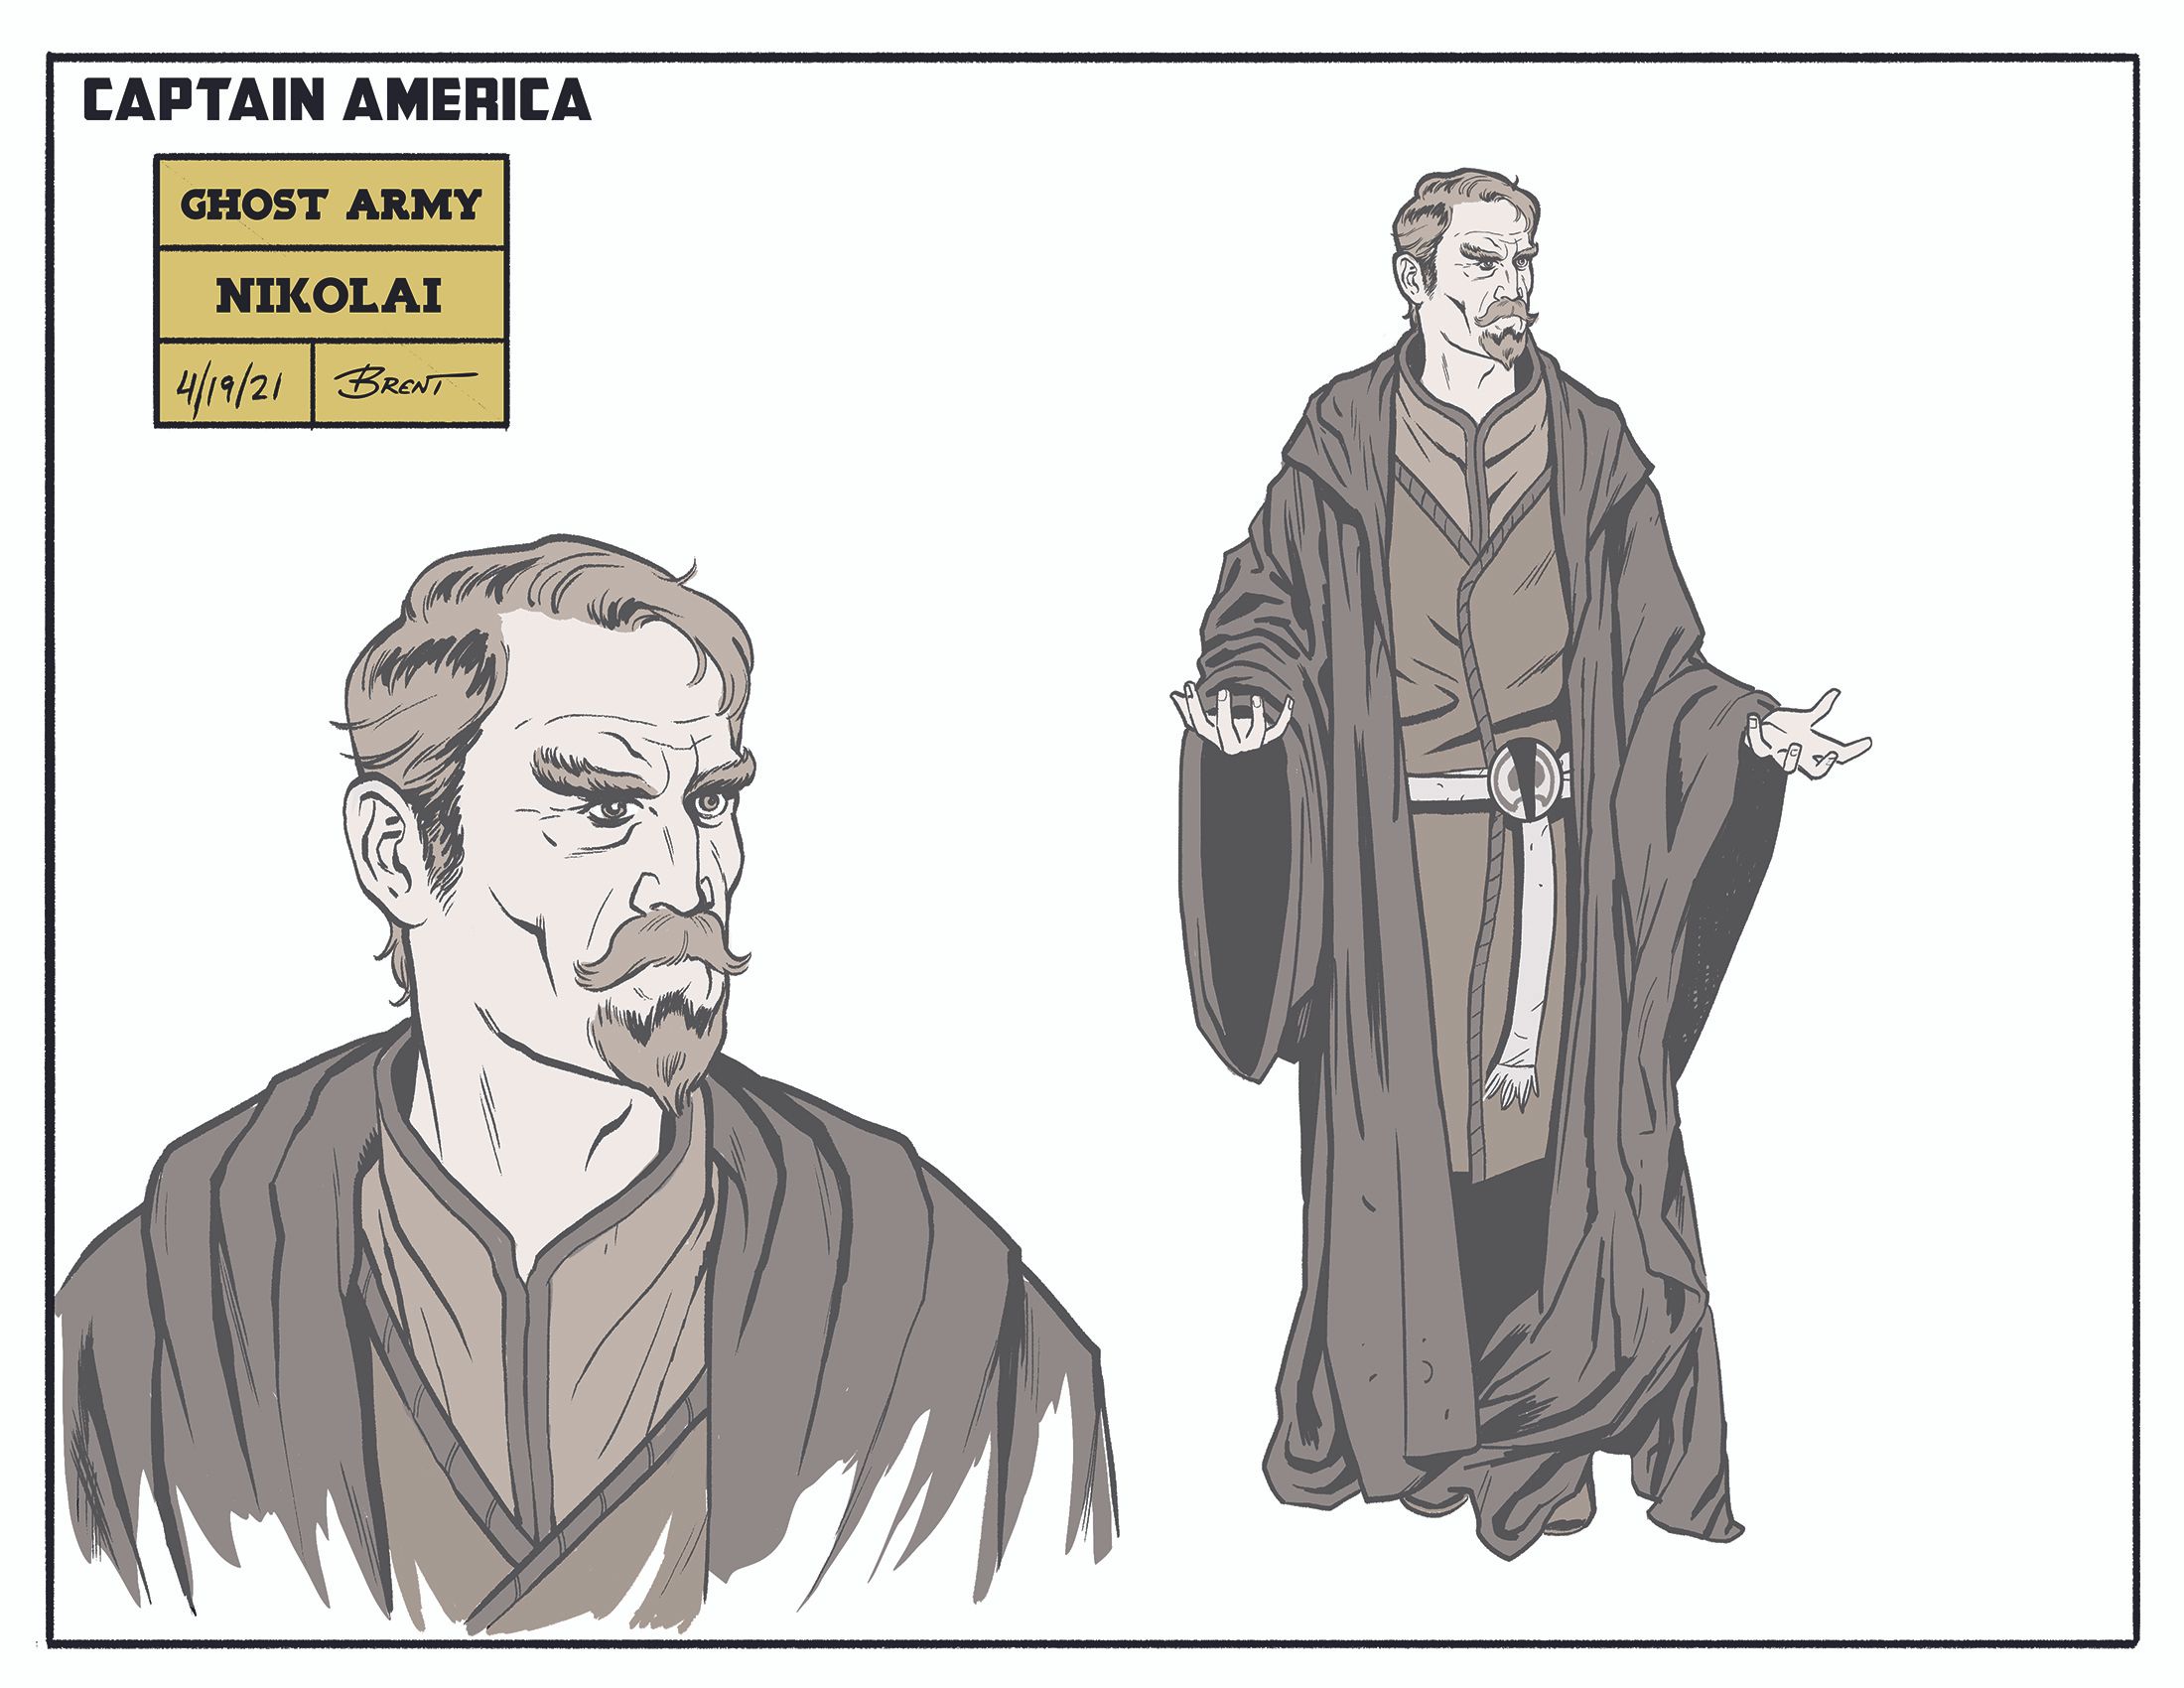 Captain America: The Ghost Army character sketch of Nikolai